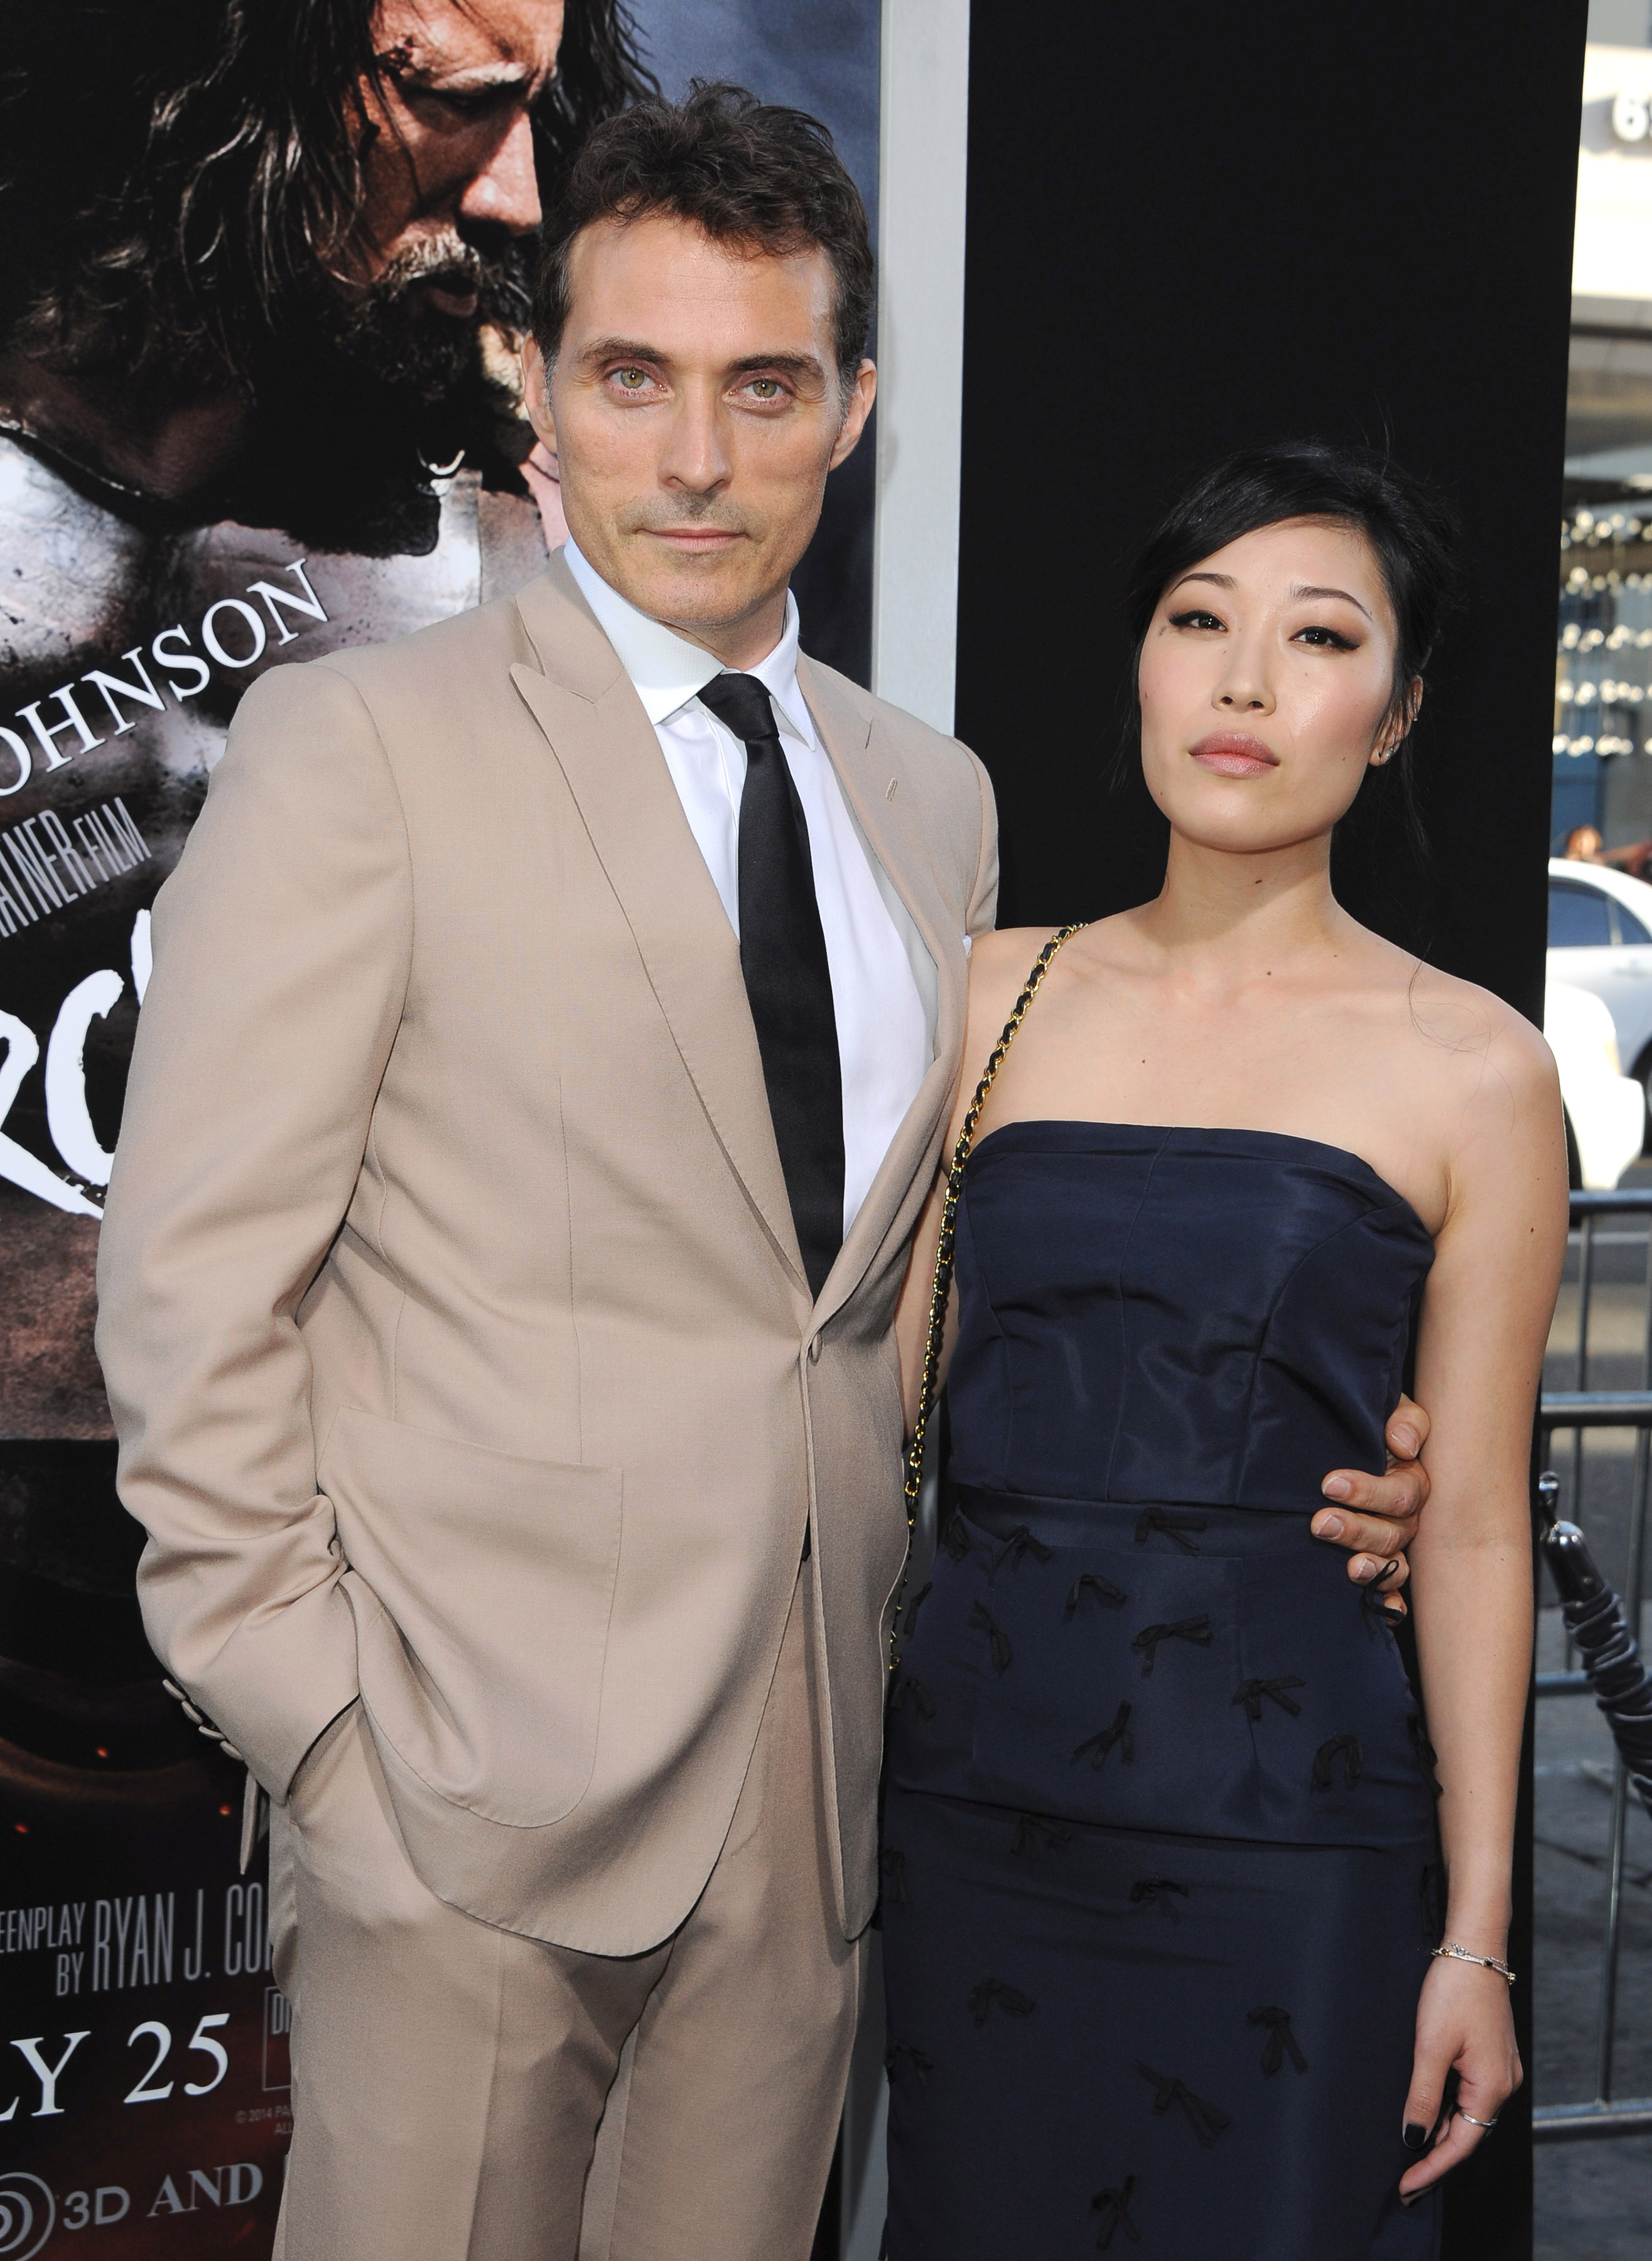 Rufus Sewell and Ami Komai at the Los Angeles premiere of "Hercules" on July 23, 2014, in California | Source: Getty Images